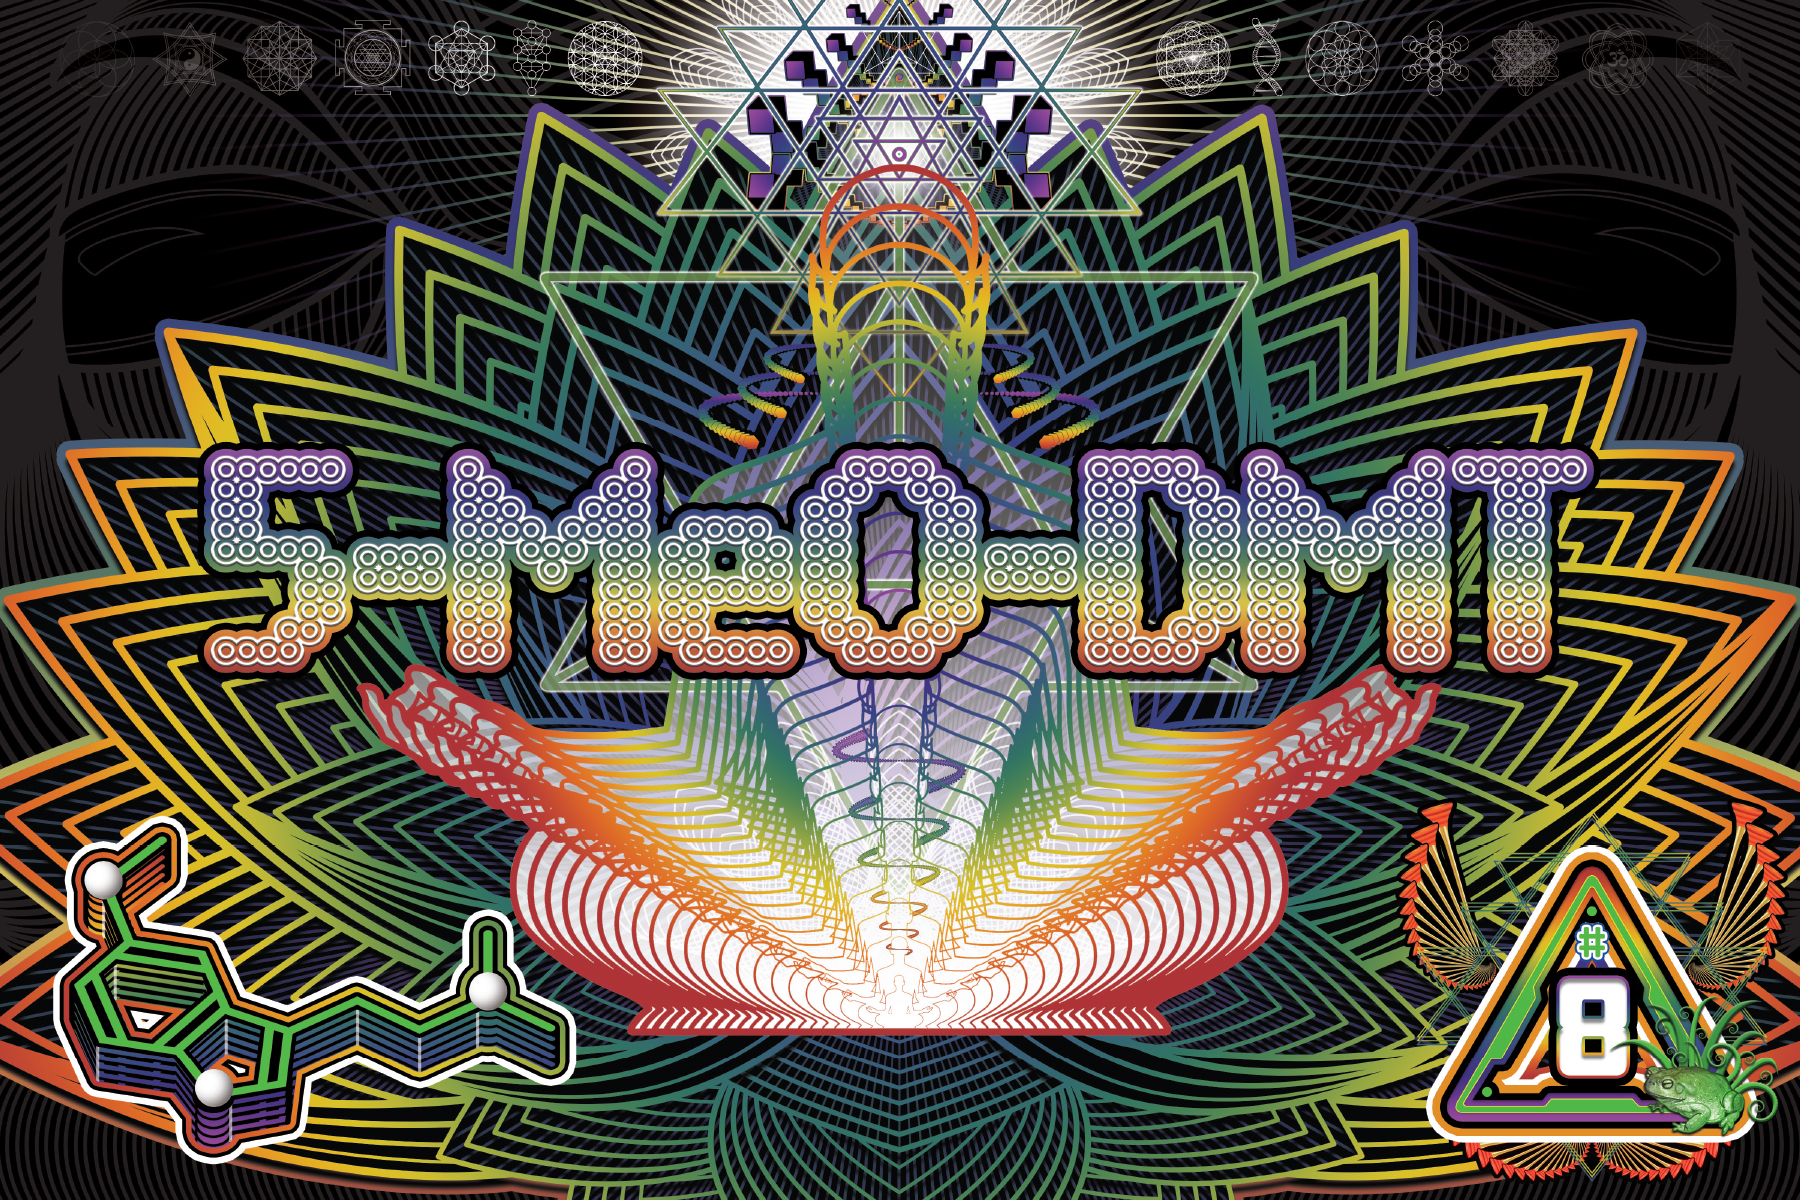 The front of the DanceSafe 5-MeO-DMT card.